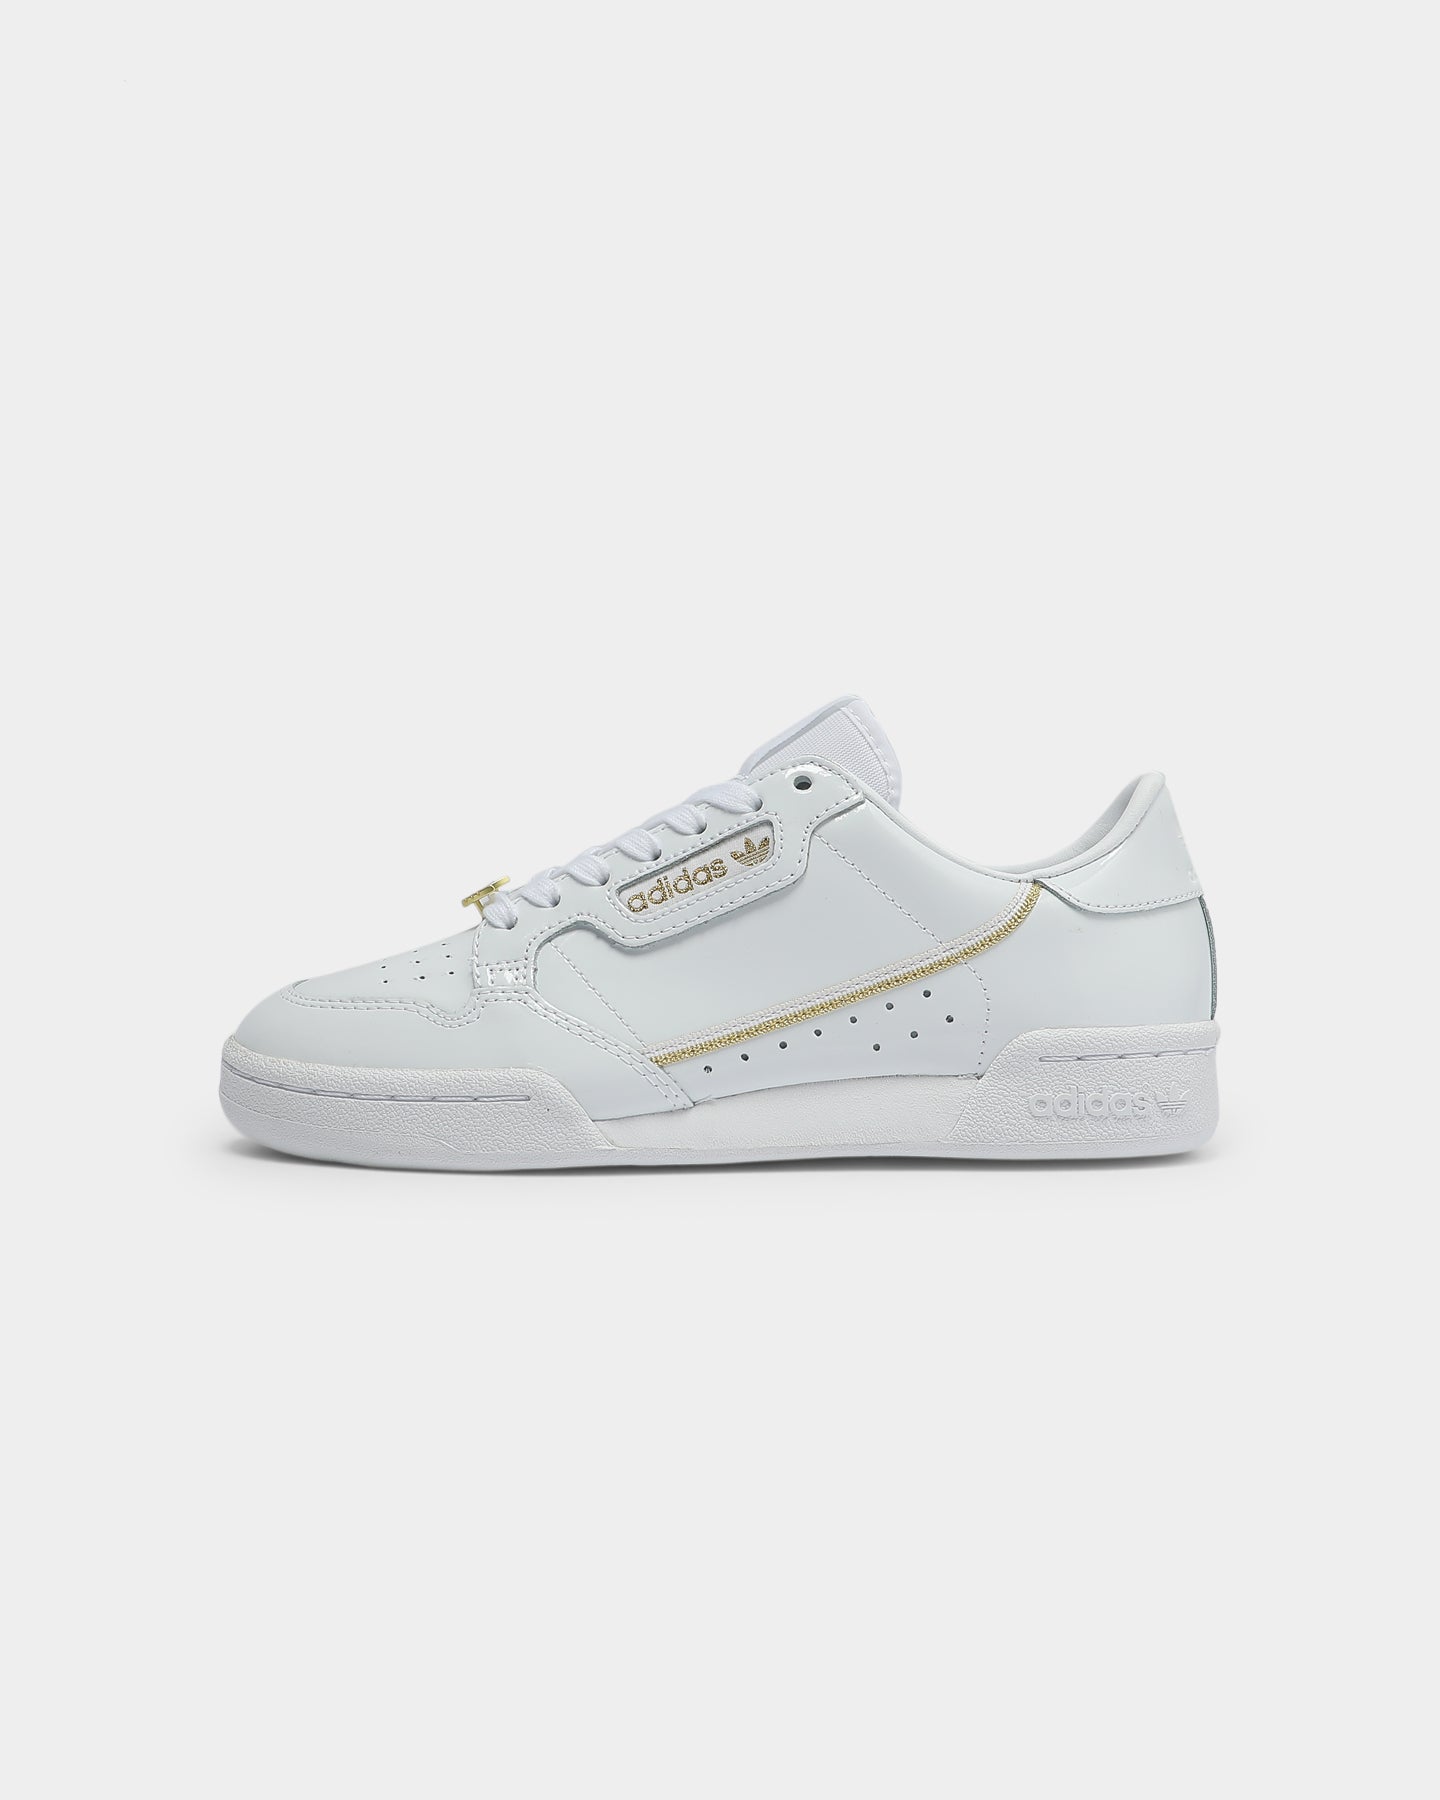 adidas continental white gold